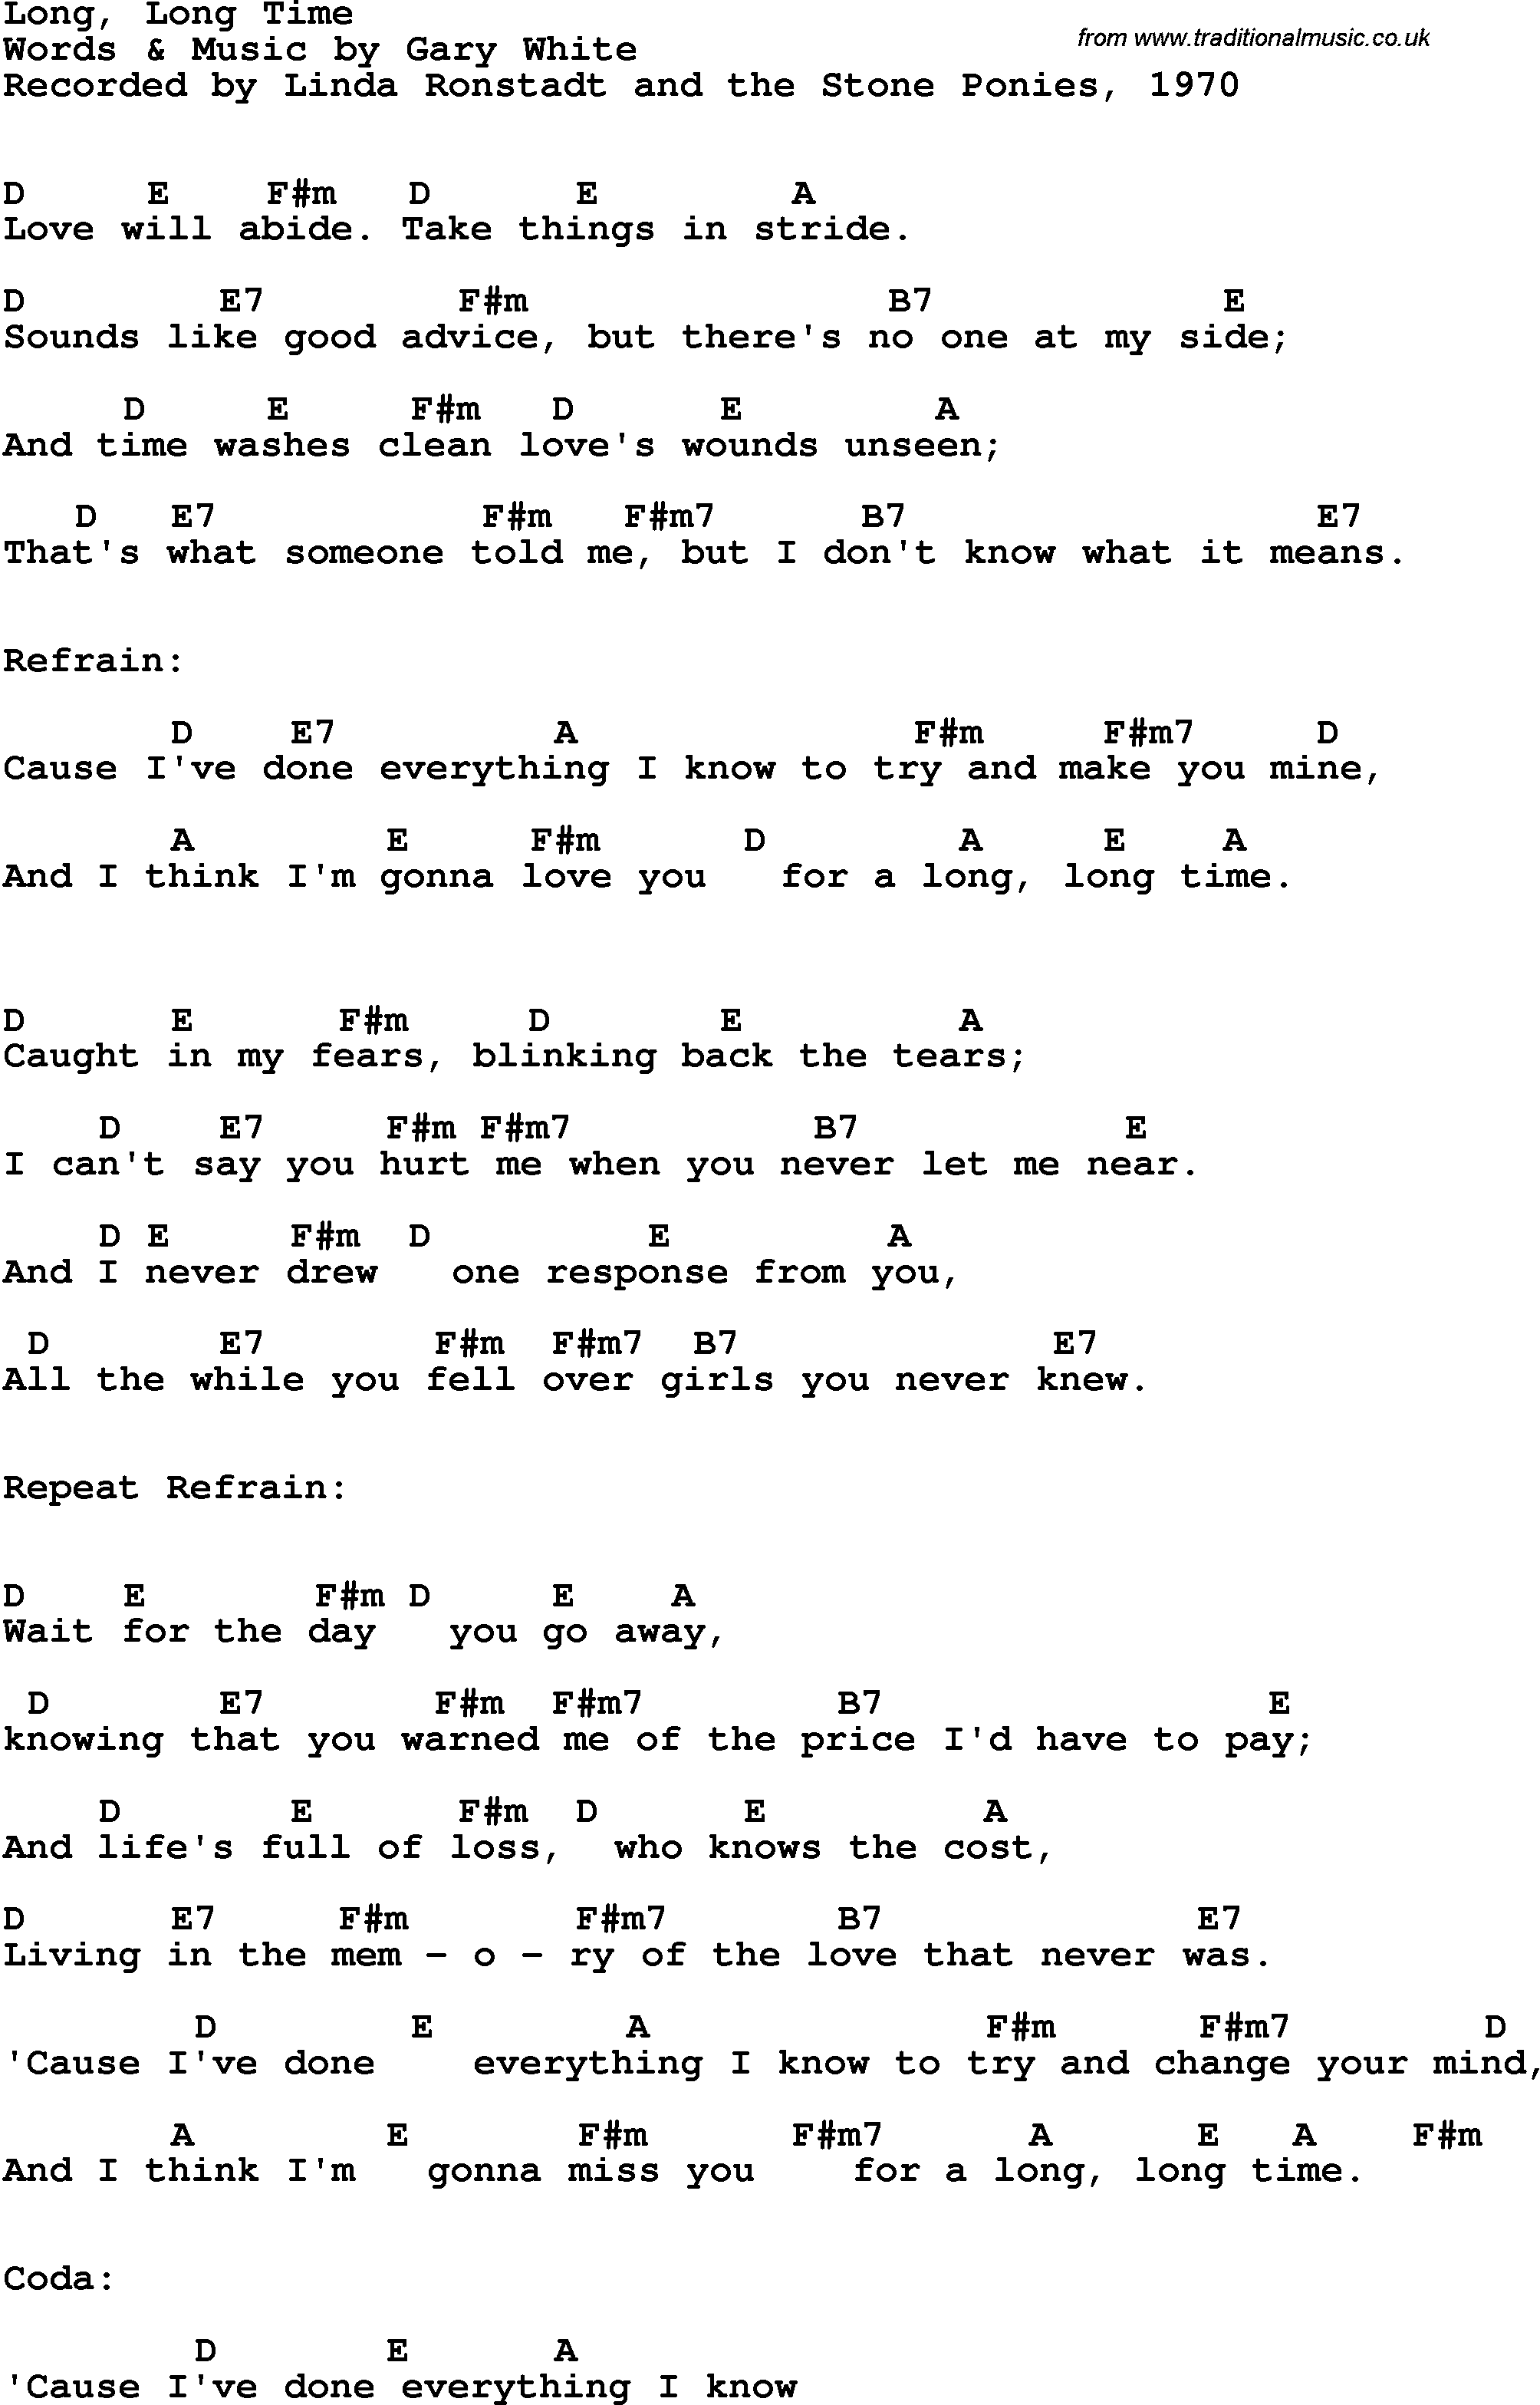 Song Lyrics with guitar chords for Long, Long Time - Linda Ronstadt, 1970